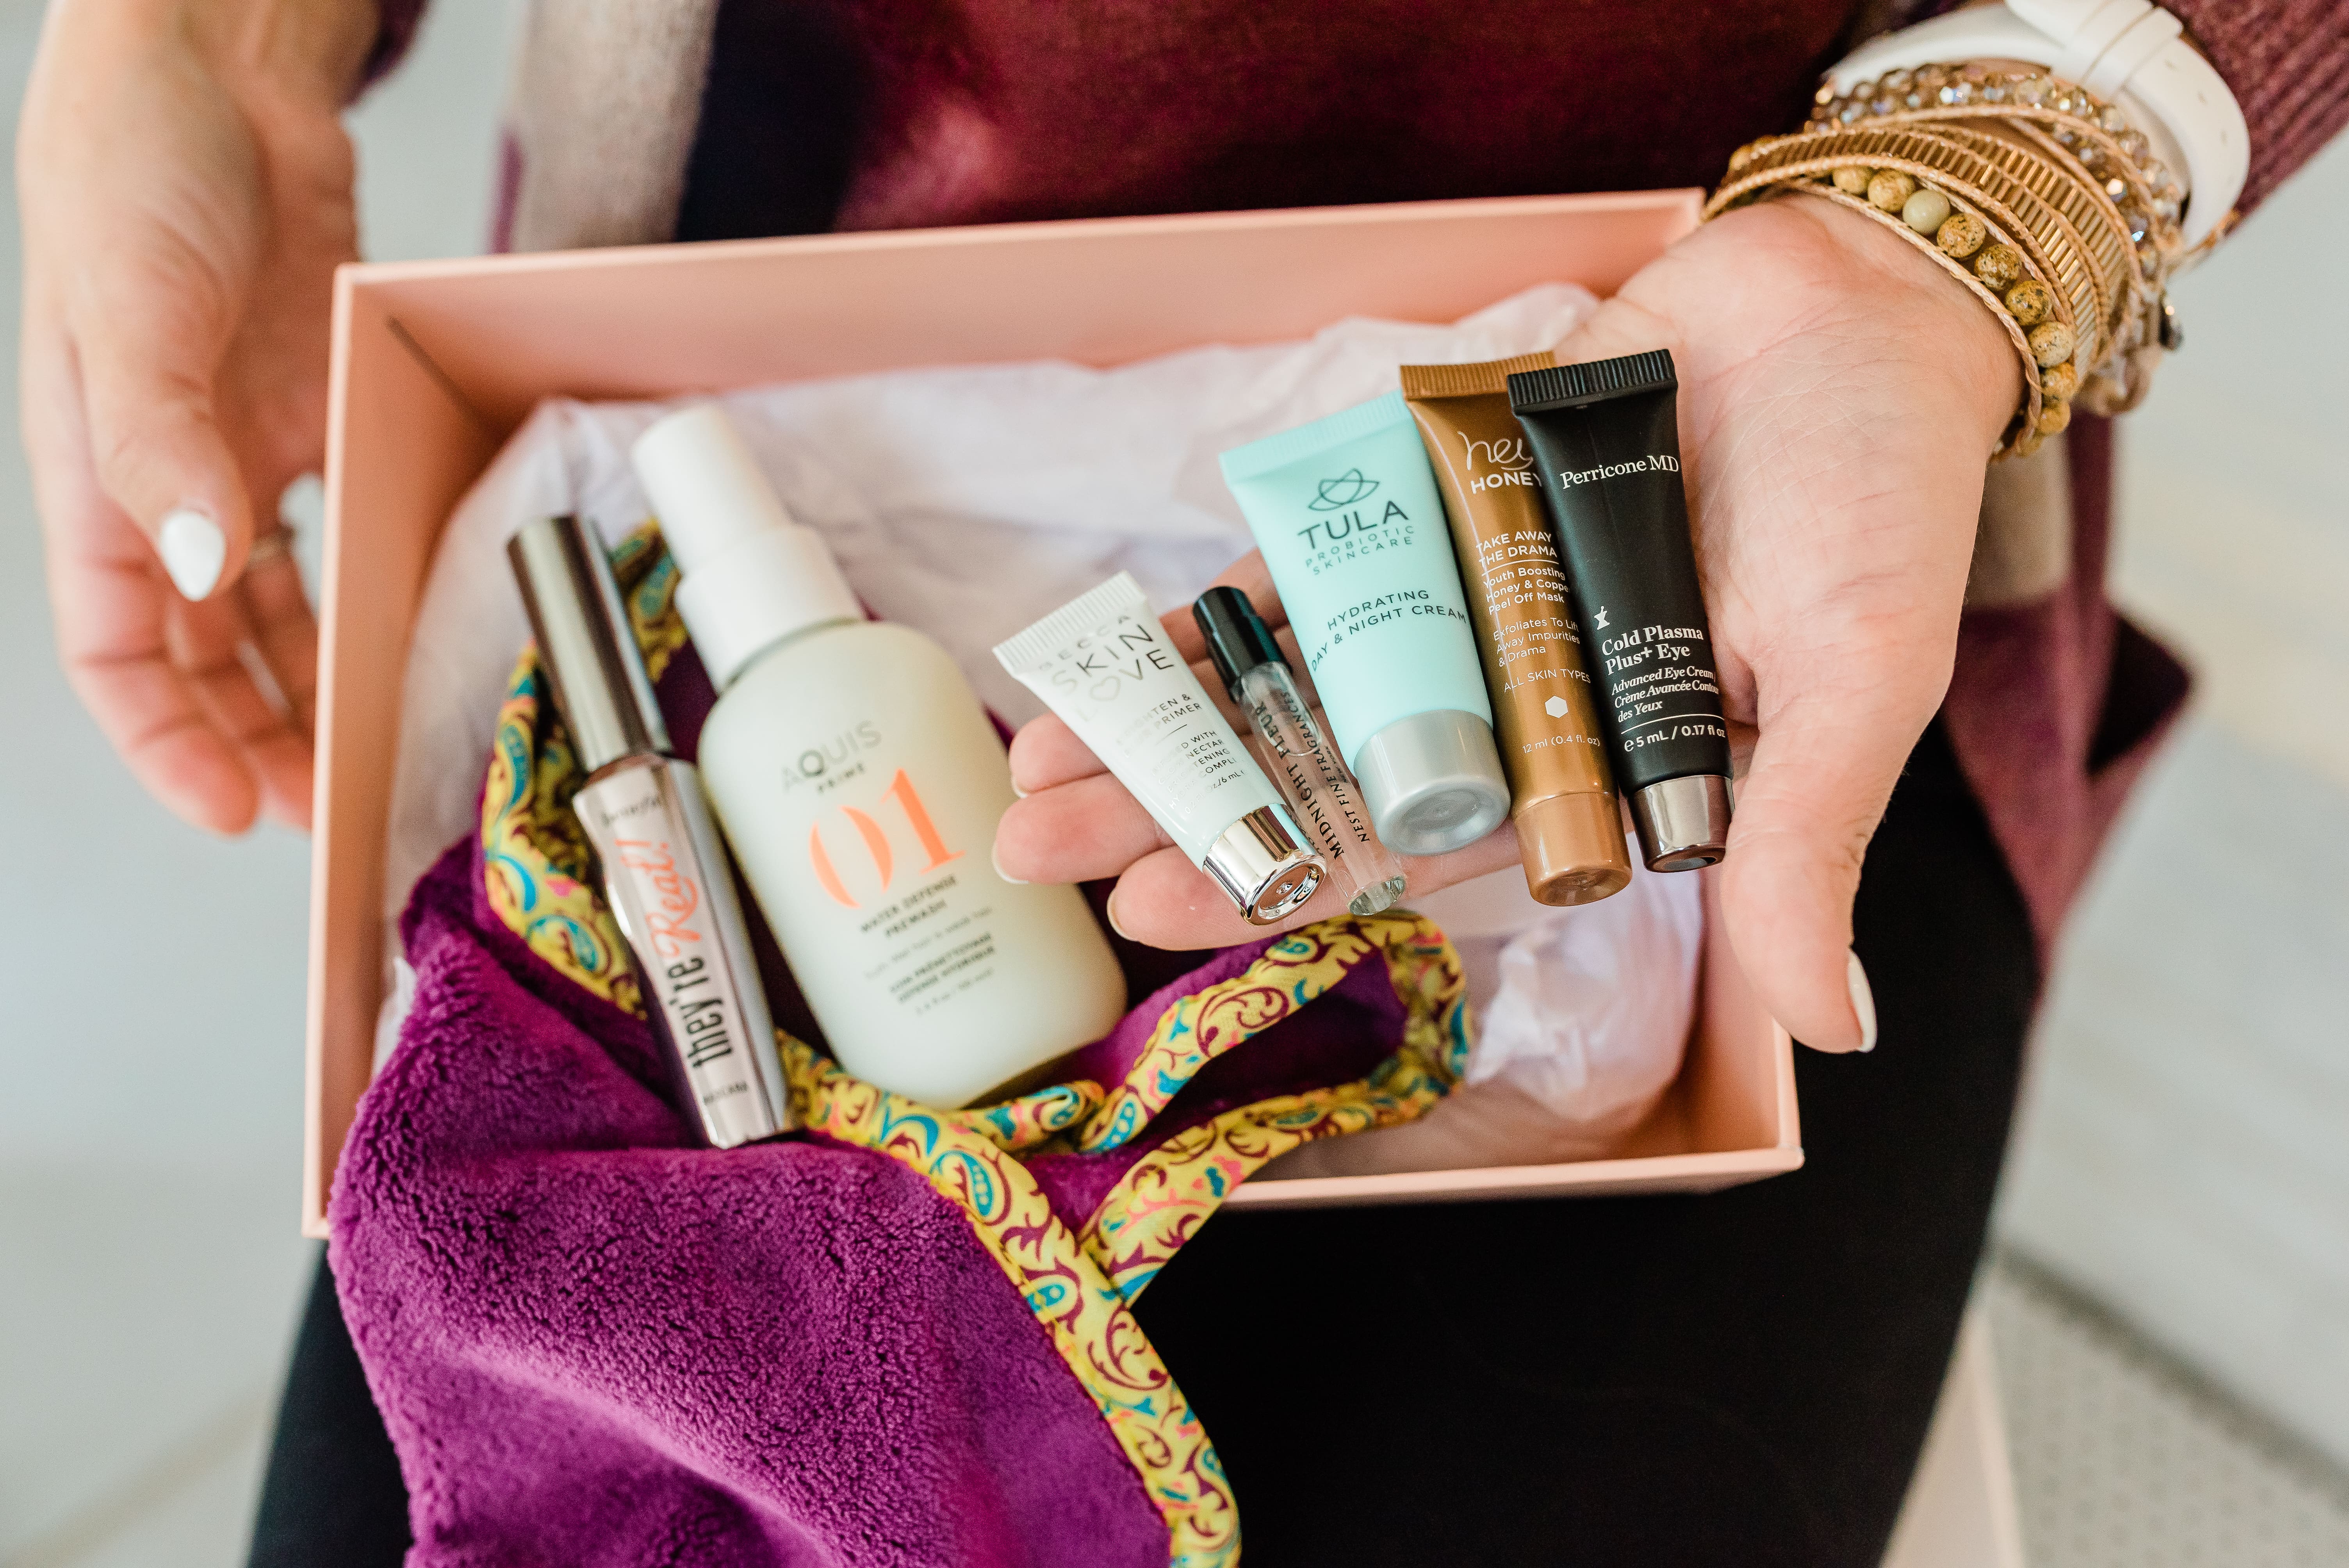 Life & Style blogger Ashlee Nichols from Little Lovelies Blog designs and curates a TILI beauty box with QVC. She features beauty, makeup, and bath items.